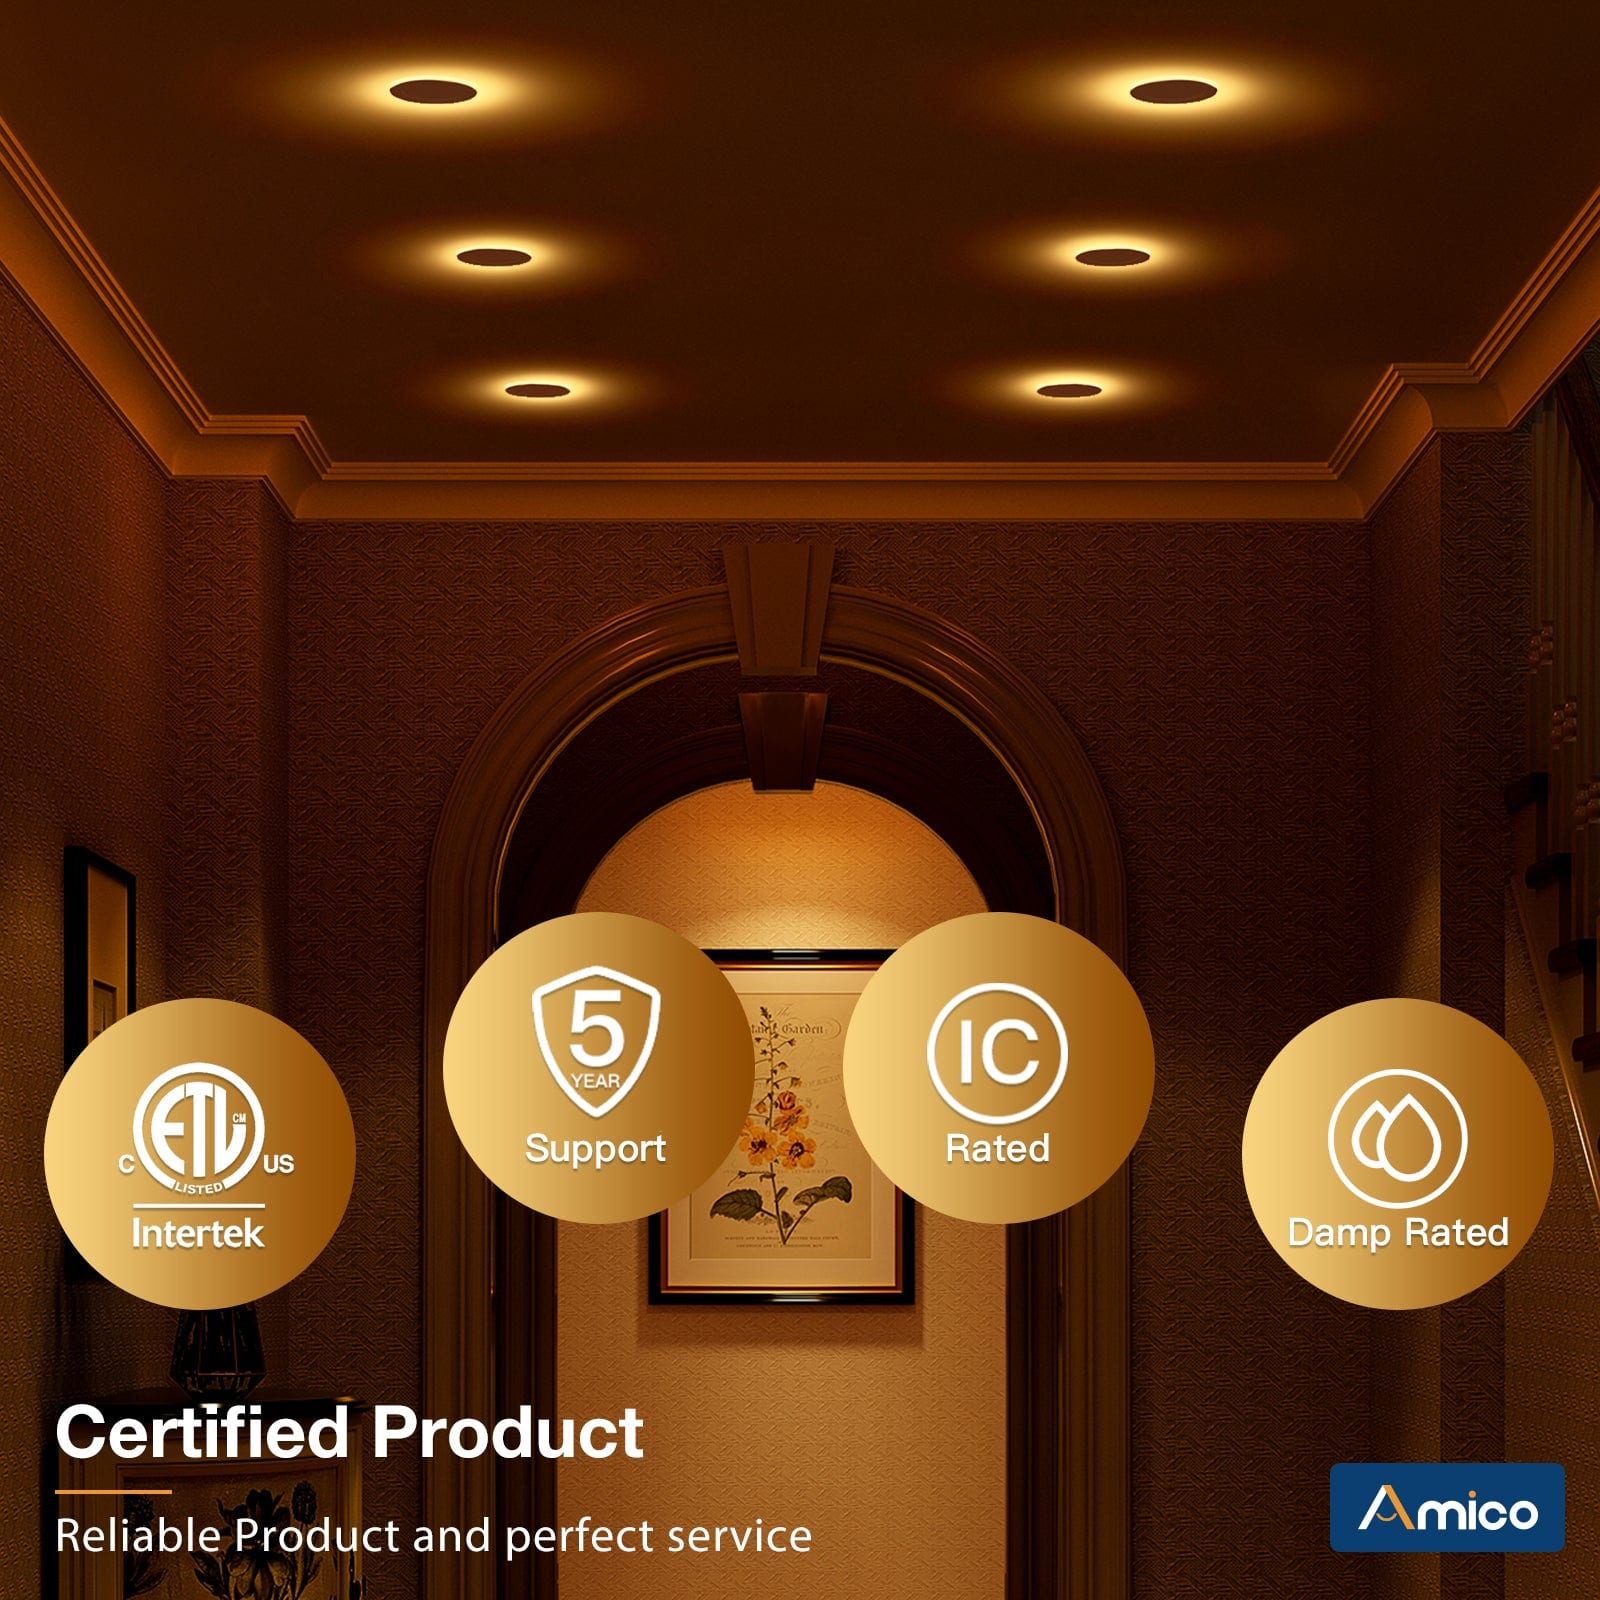 Certified recessed lighting solutions-ETL Intertek, 5 Years Support, IC Rated, Damp Rated.